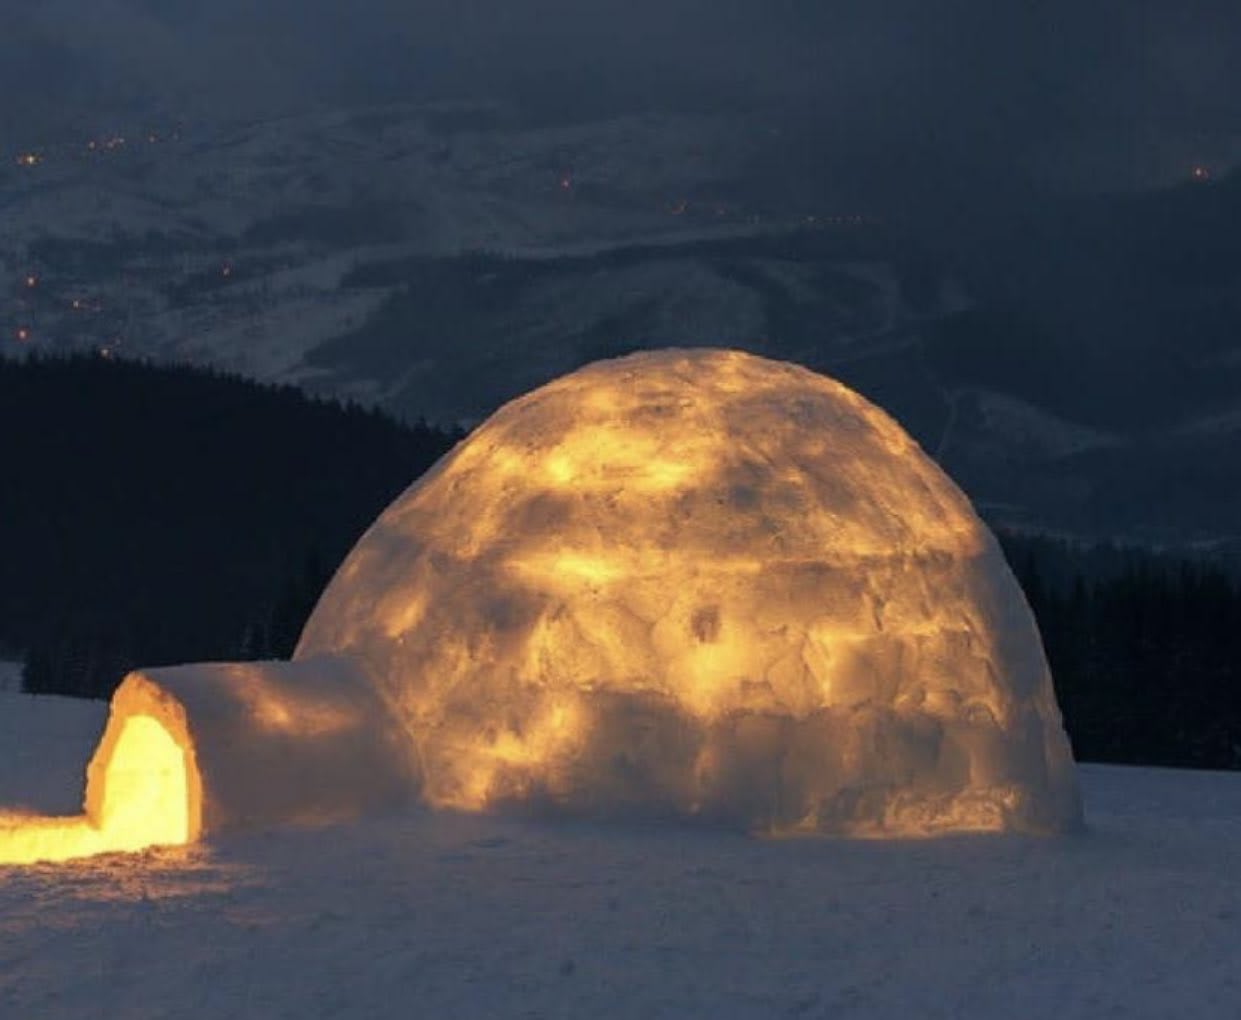 This is what an igloo looks like when you build a fire inside. The fire melts the inner layer of ice, and the cold outside refreezes it- adding a layer of insulation that can keep the igloo at 60° inside while it’s -50° outside